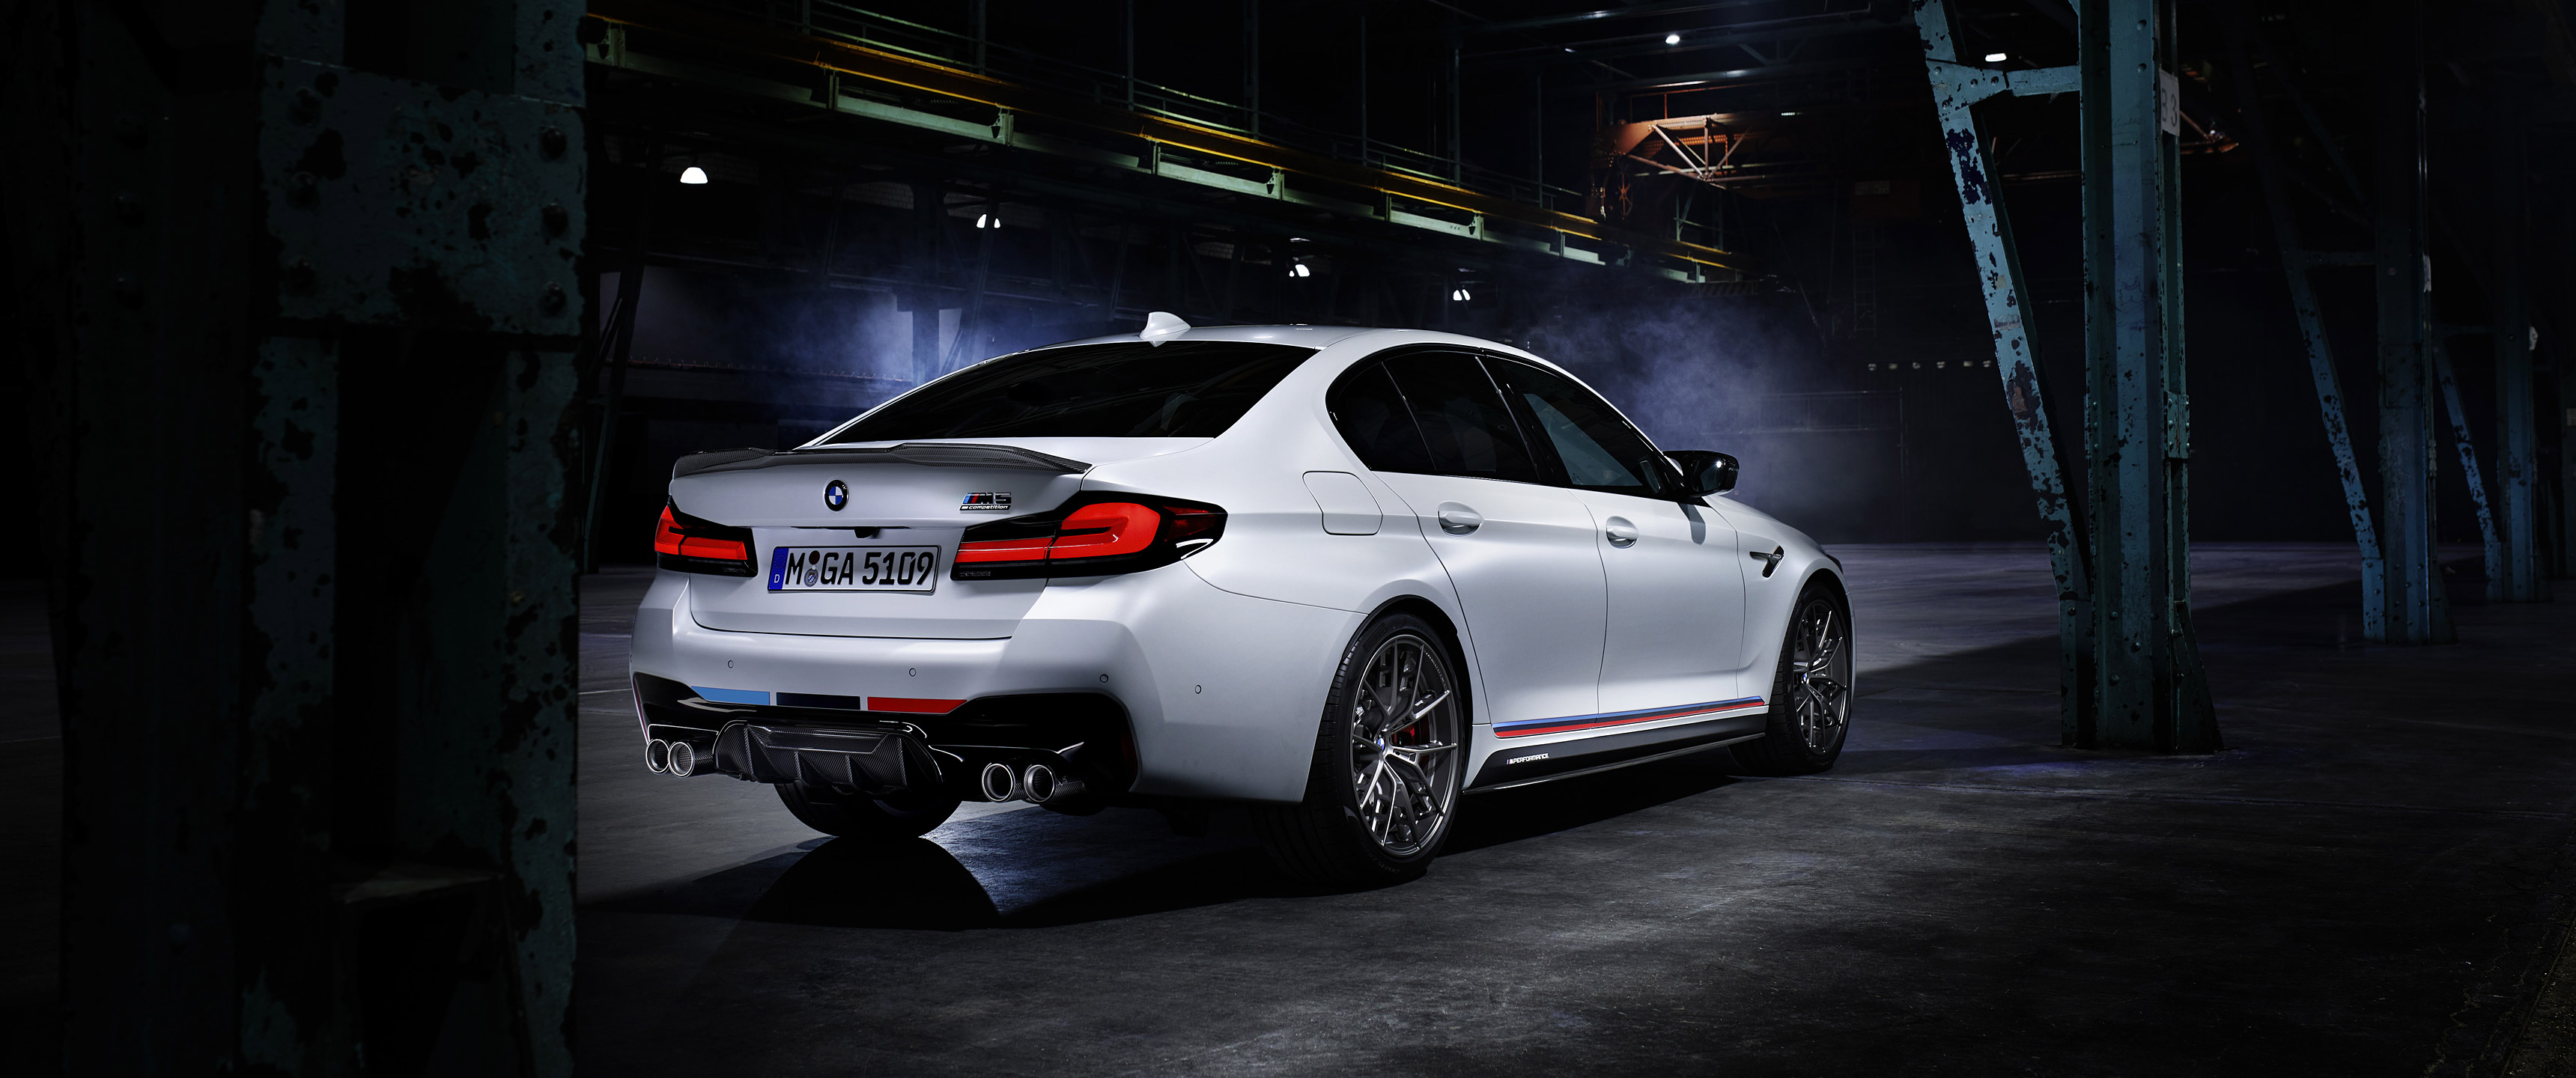  2021 BMW M5 Competition Wallpaper.